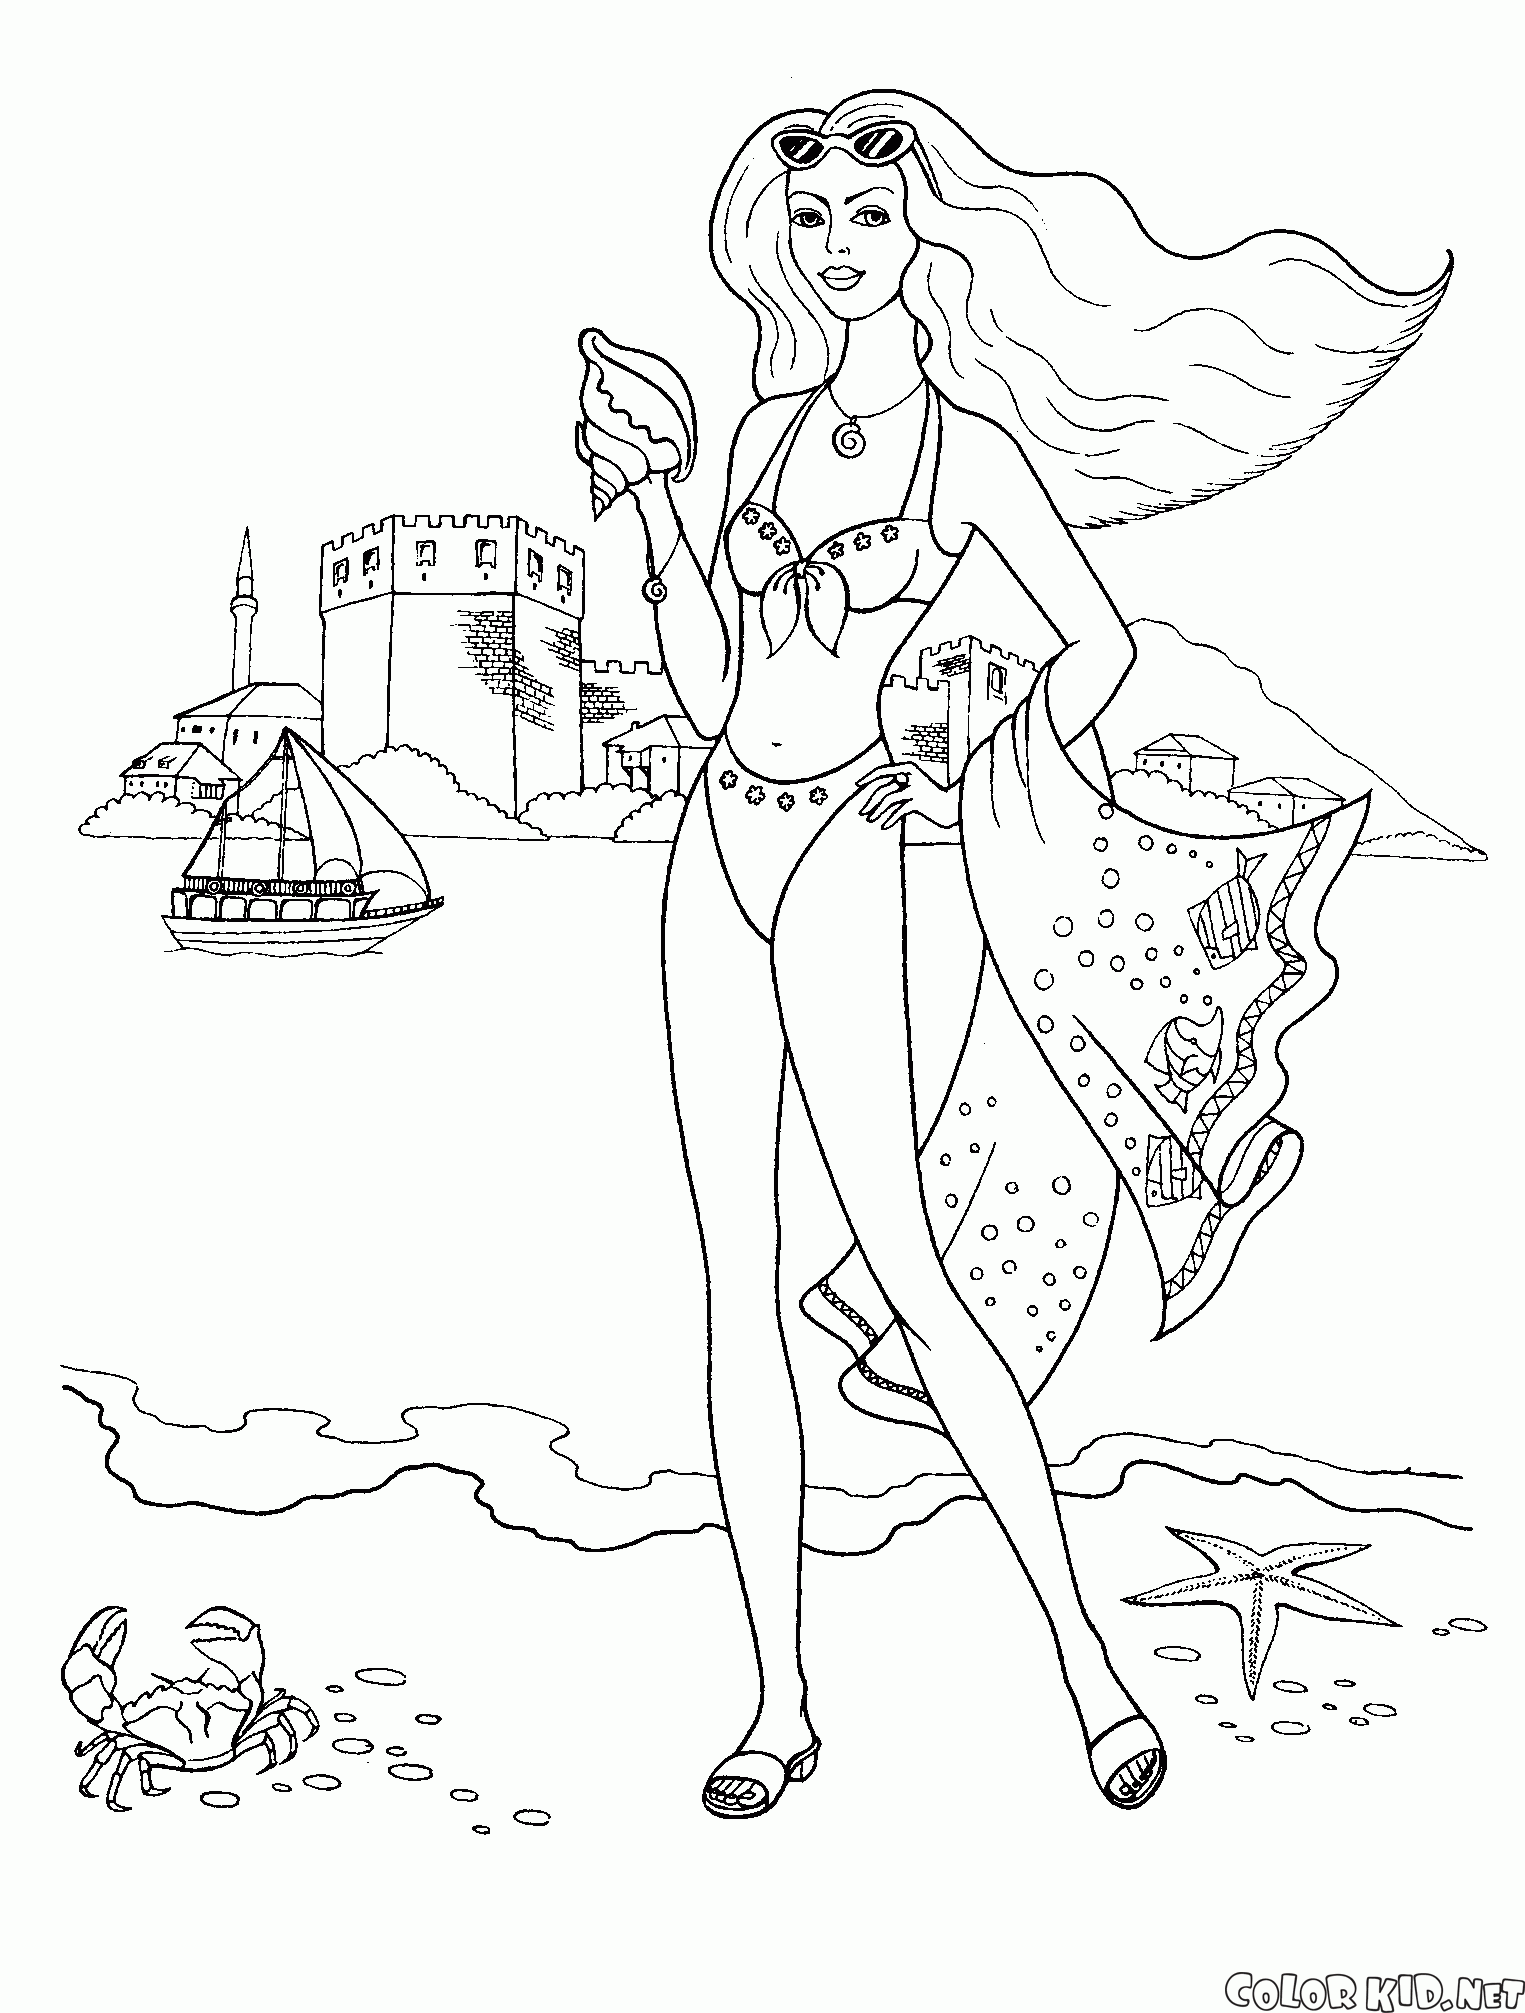 Coloring page - Girl with a monkey